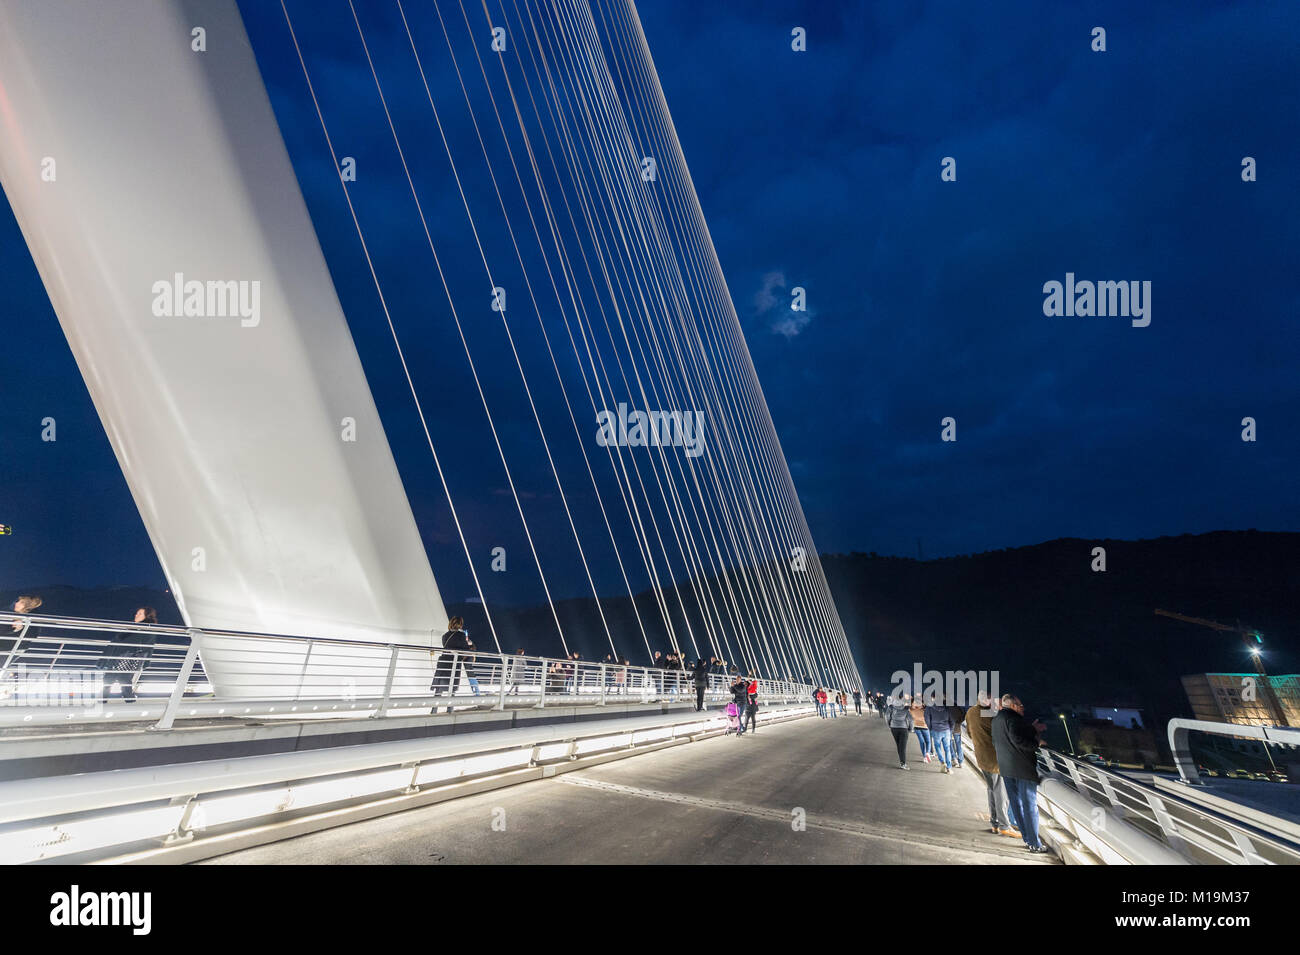 Cosenza, a night view of the new bridge bridge built in Cosenza, designed by architect and engineer Santiago Calatrava, named after San Francesco di Paola, the patron saint of Calabria. The bridge was inaugurated on January 27, 2018, and was designed and built in the shape of a harp, it is 104 meters tall, has a 130 meter long pylon and is inclined to 52 degrees from which the tie rods depart. around 20 million euros. It is currently considered one of the largest works made in the south. The bridge connects the two banks of the river Crati connecting the district Gergeri with Via Popilia. 28/0 Stock Photo